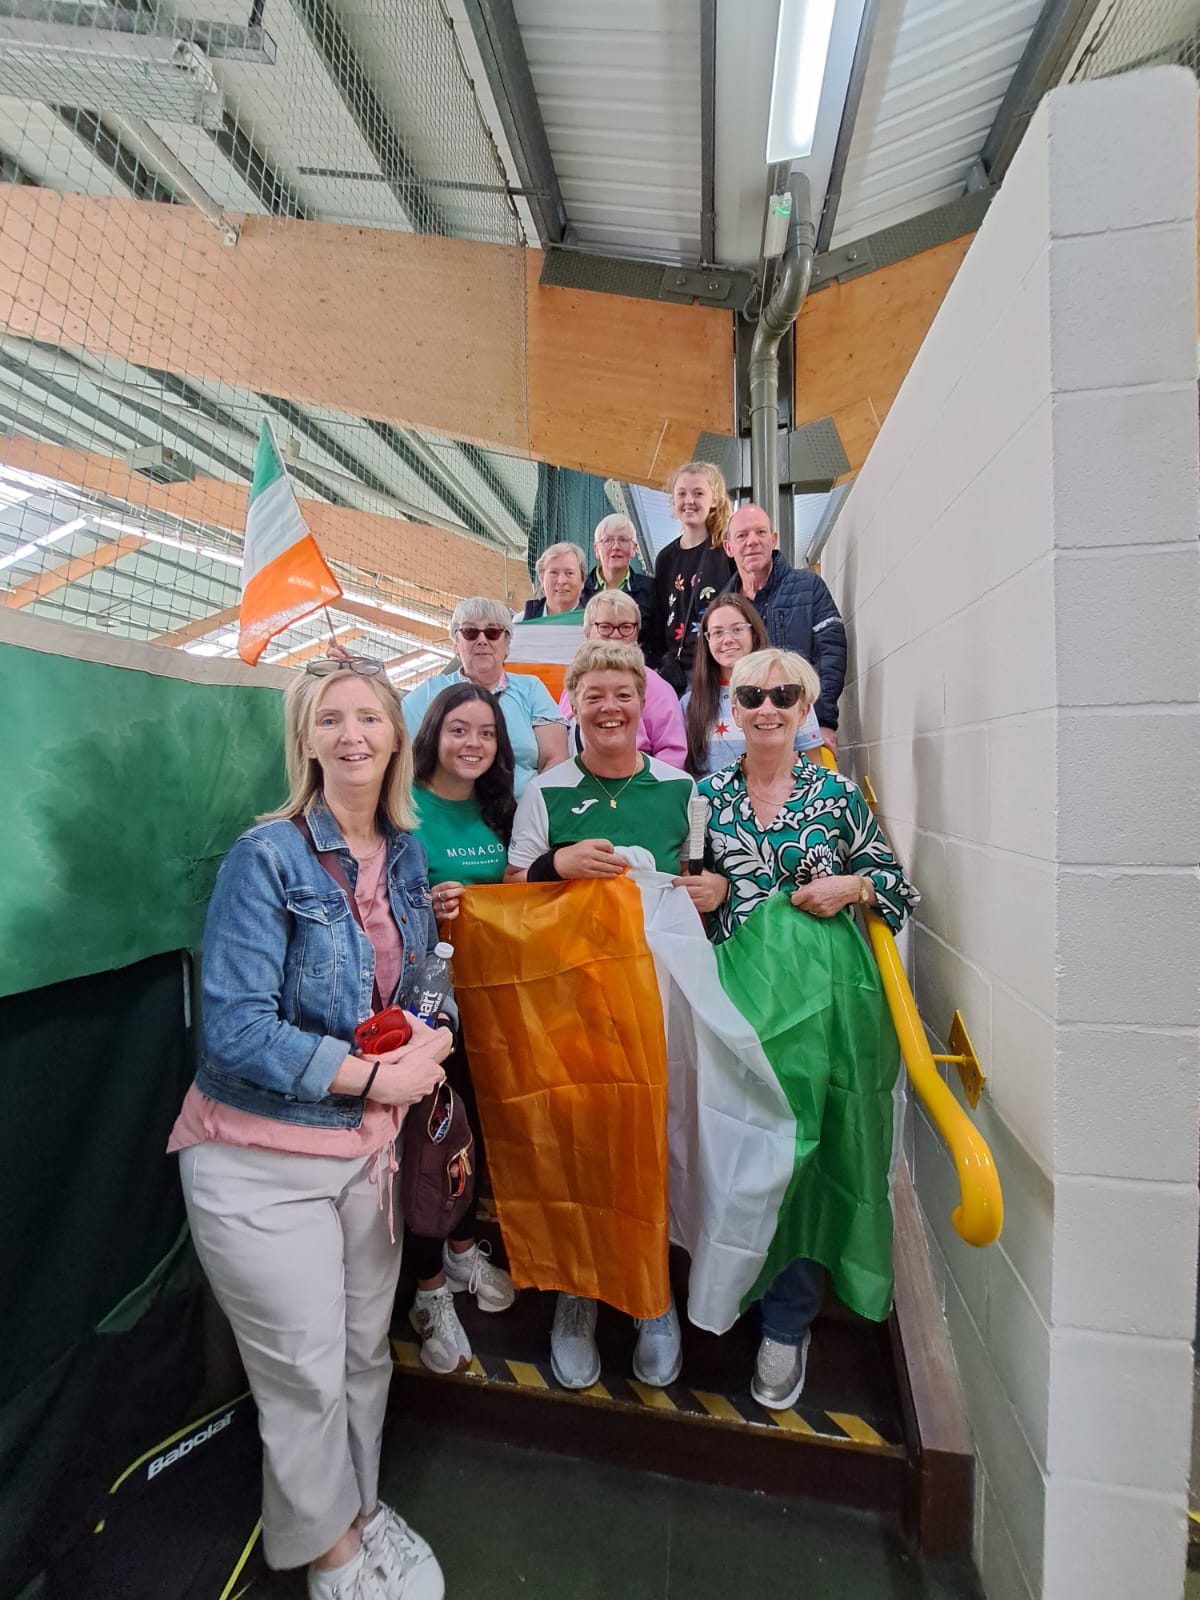 A group picture of Irish Blind/VI tennis team member Marguerite Quinn with supporters at the IBSA World Games 2023